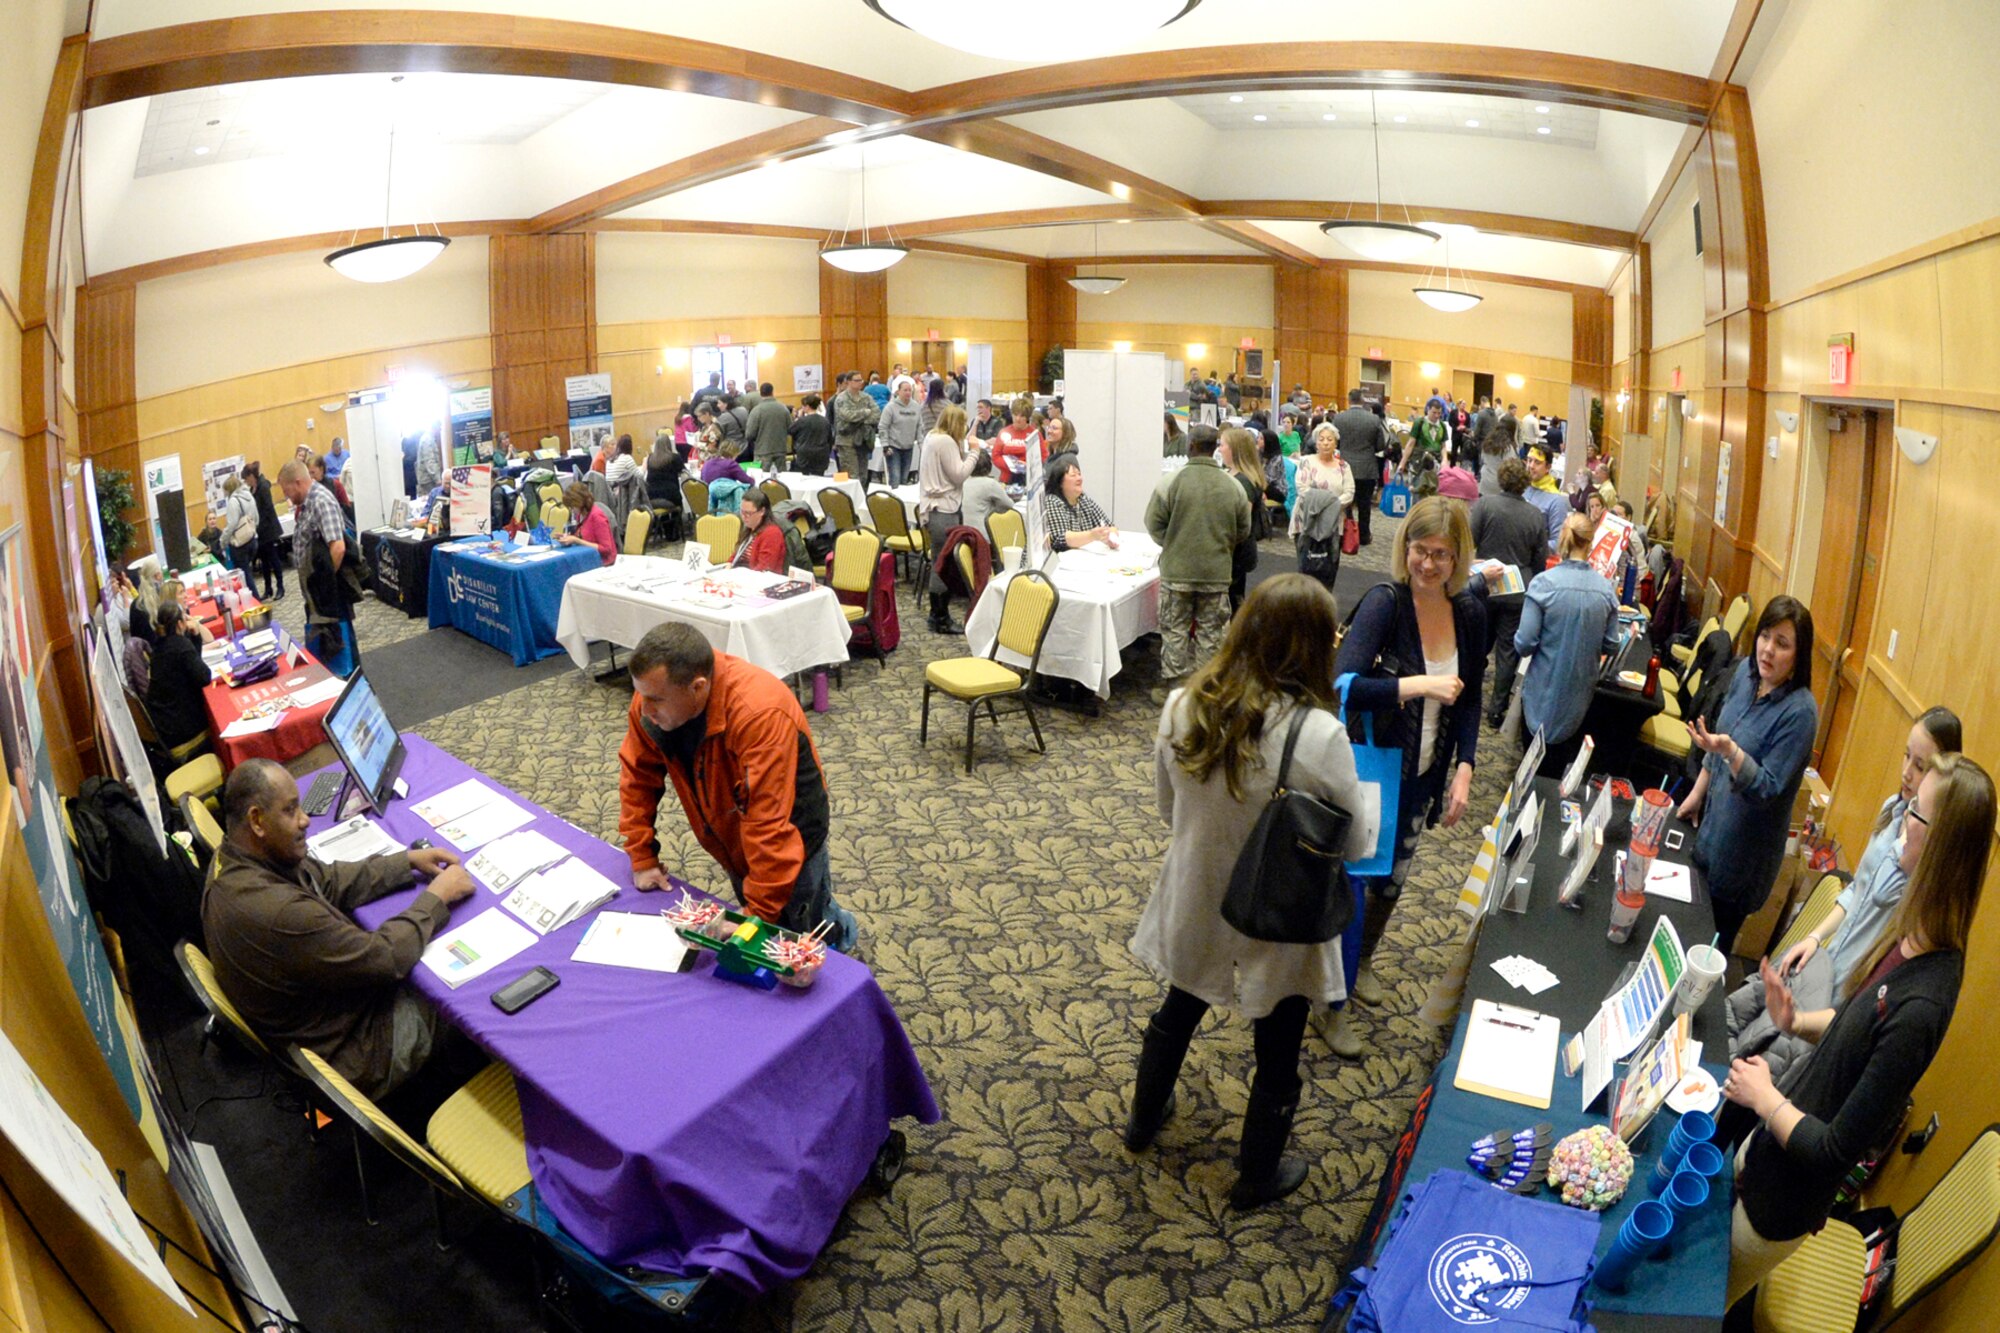 Guests attend the Speacial Needs Summit held March 15, 2018, at Hill Air Force Base, Utah. The annual summit gives the community a chance to research and learn about special needs services and opportunities available in the area. (U.S. Air Force photo by Todd Cromar)